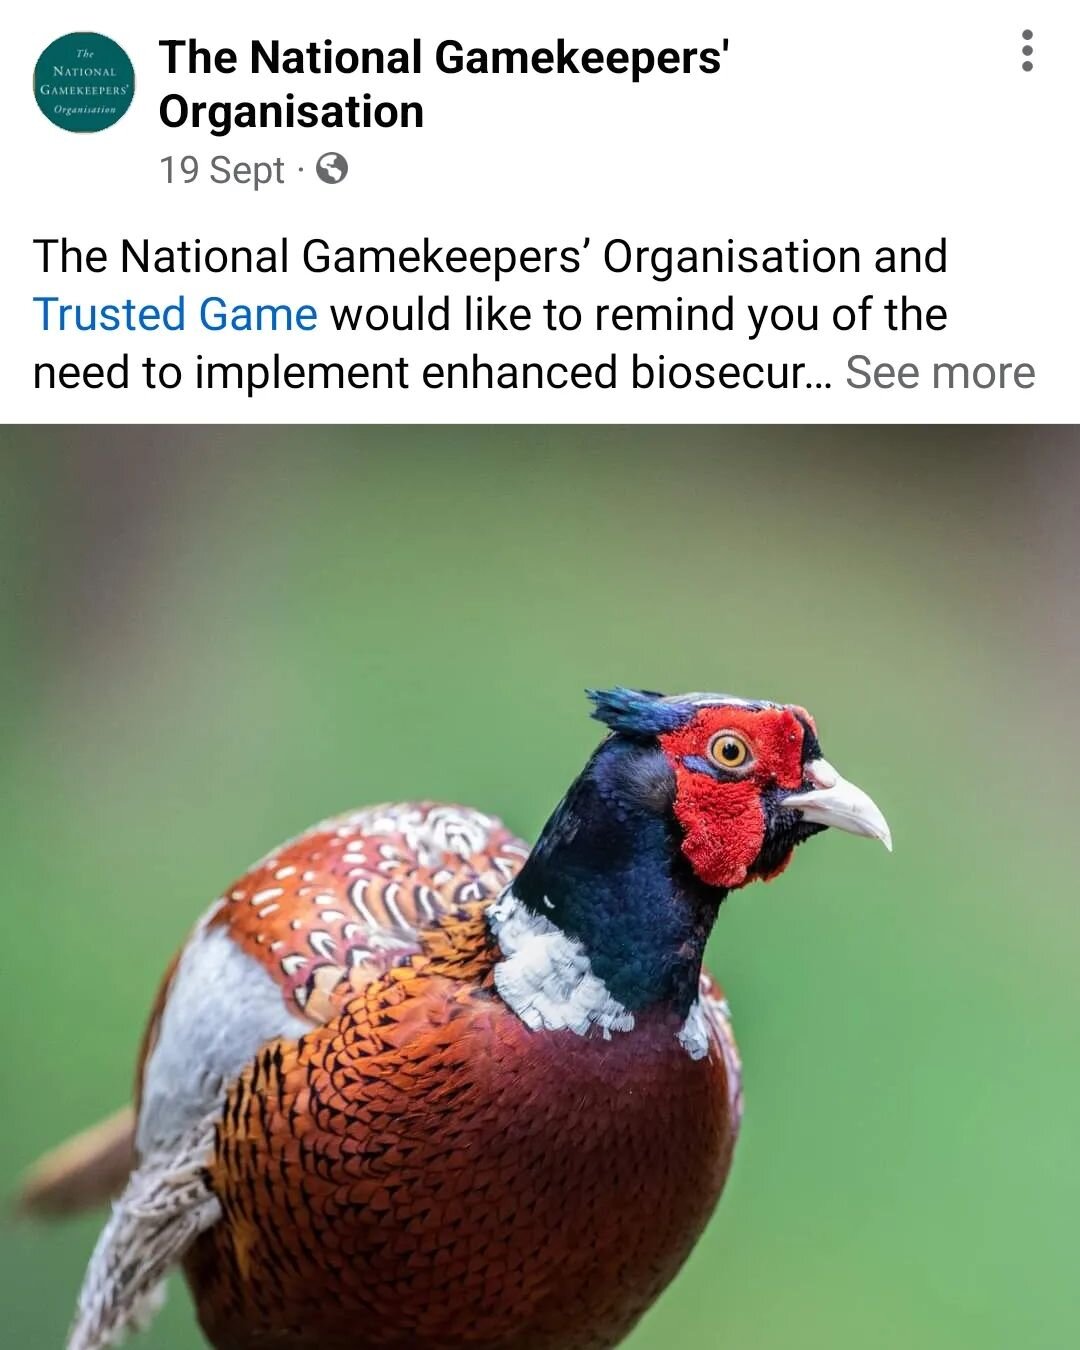 We should all be practising enhanced biosecurity and taking measures to prevent AI potentially being spread from one shoot to another by the movement of people. See @the_ngo_gamekeepers article for more details.